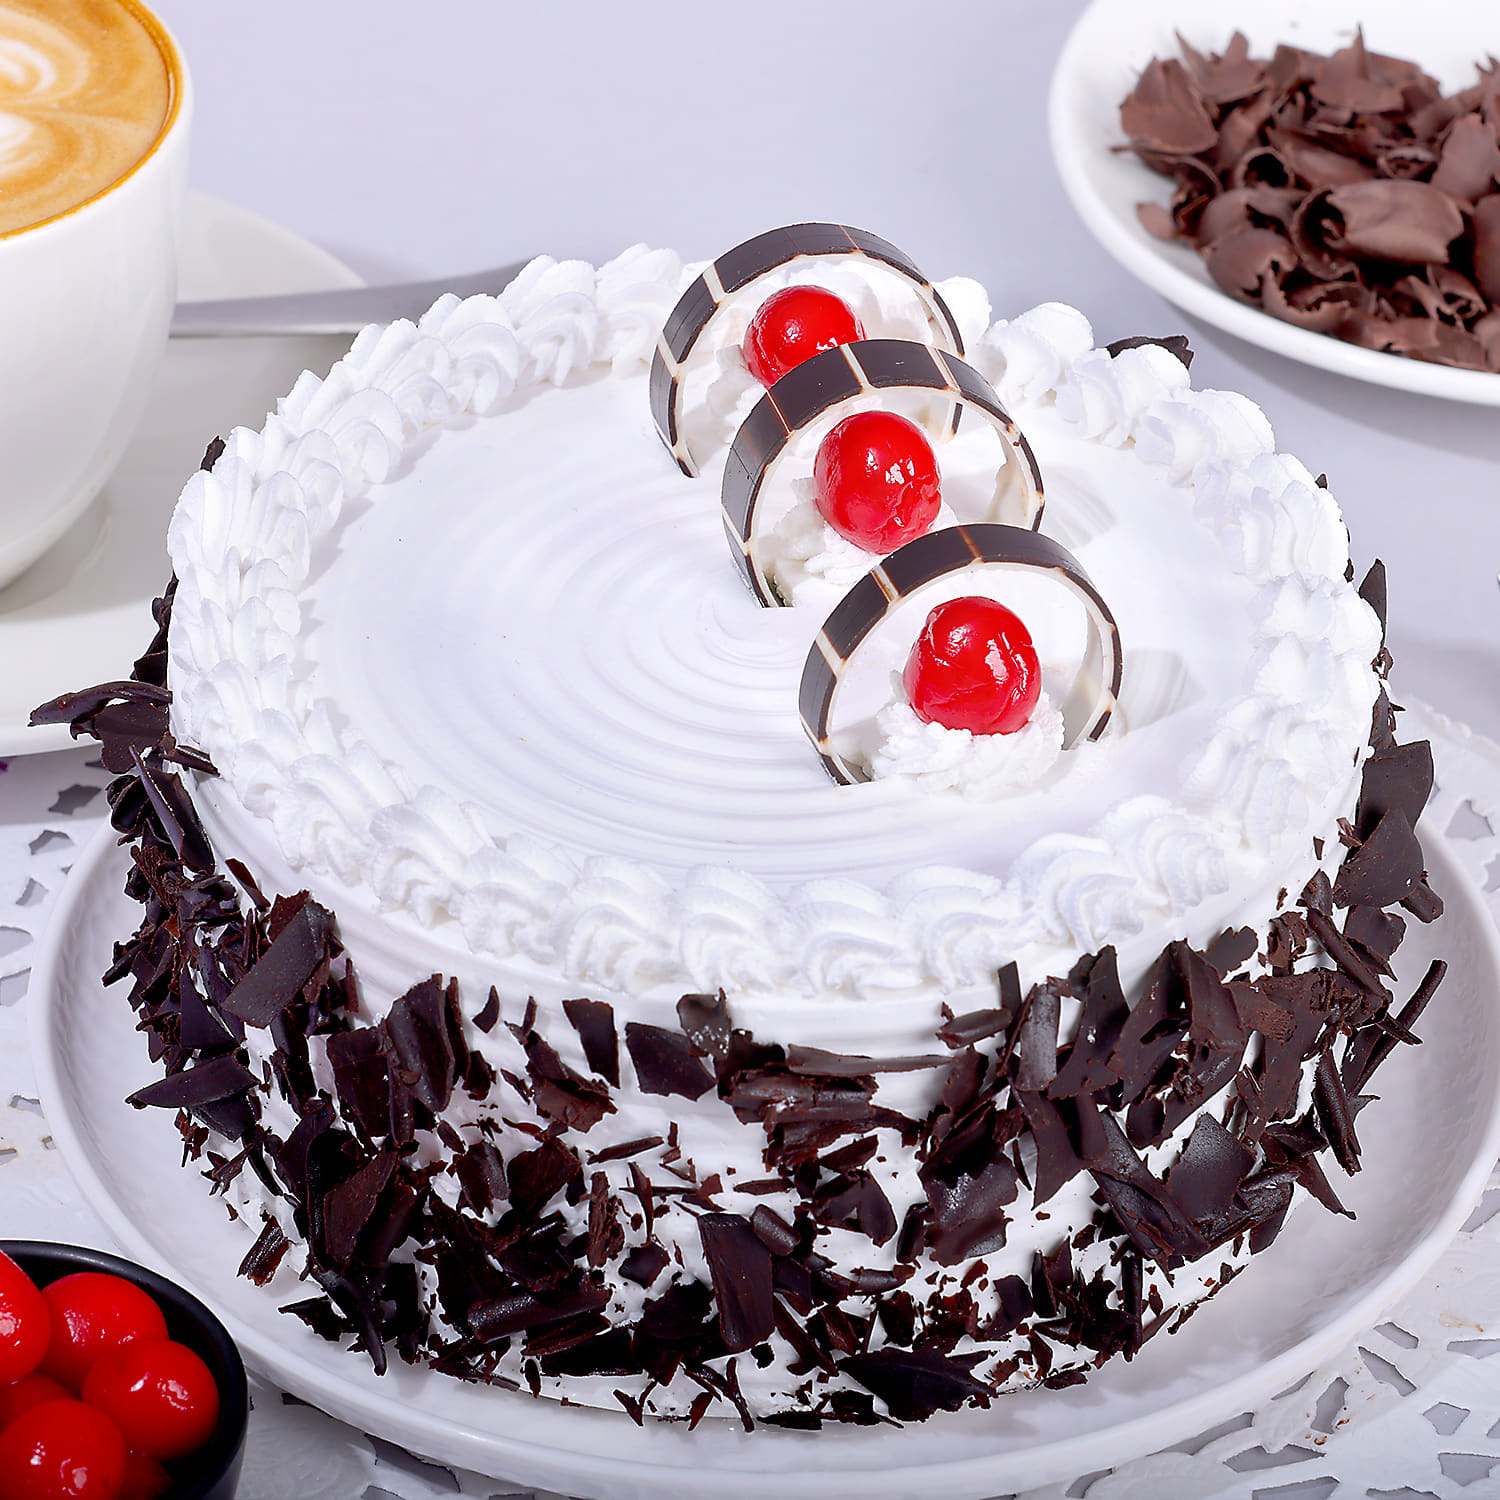 Online Cake Delivery in Nagpur | Order Cakes Online in Nagpur | CakExpo